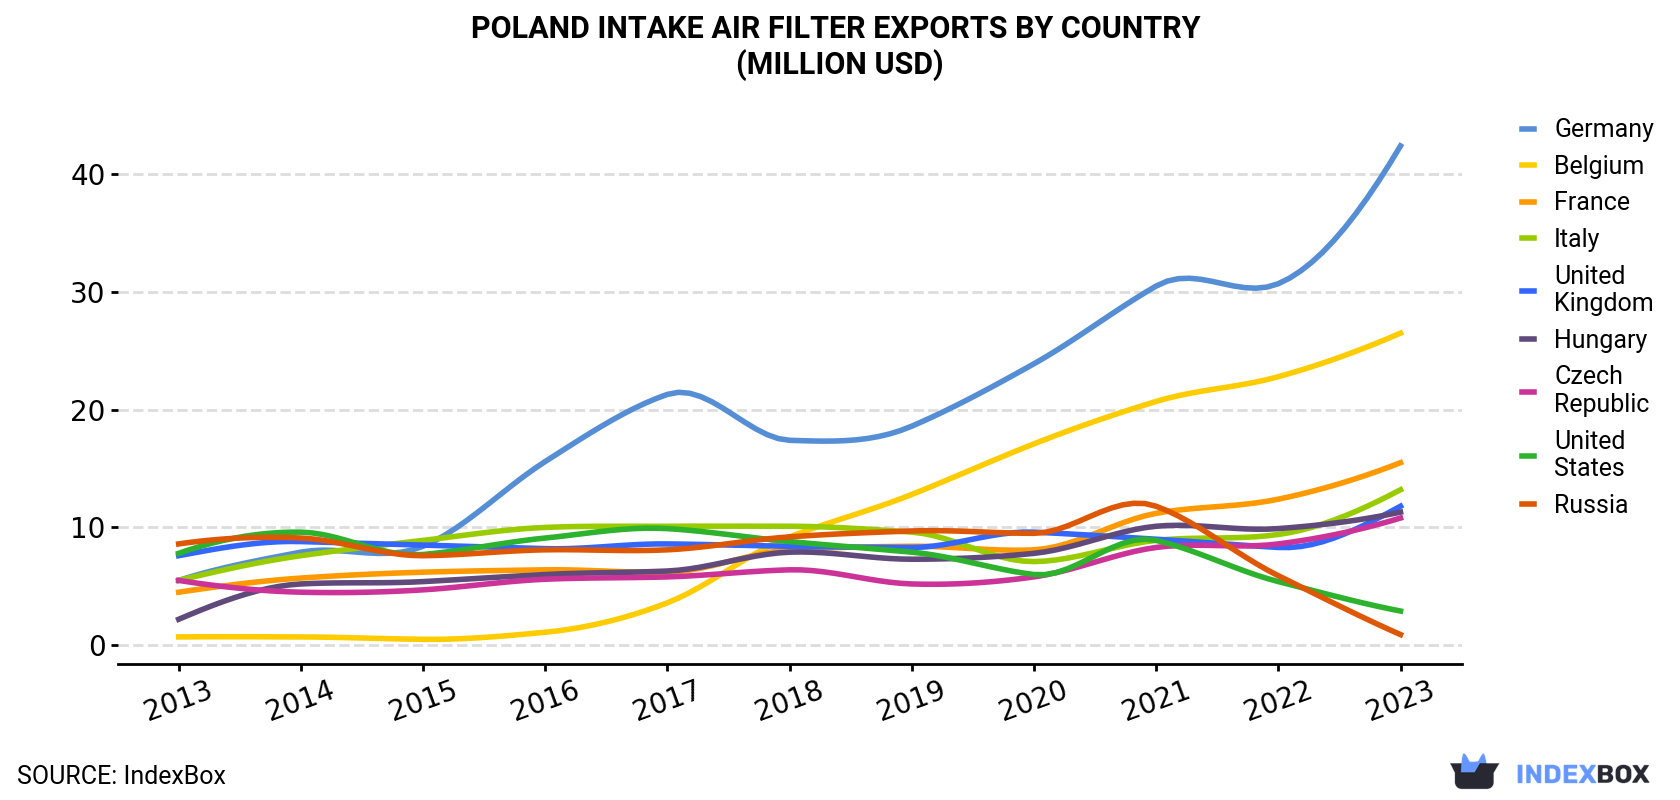 Poland Intake Air Filter Exports By Country (Million USD)